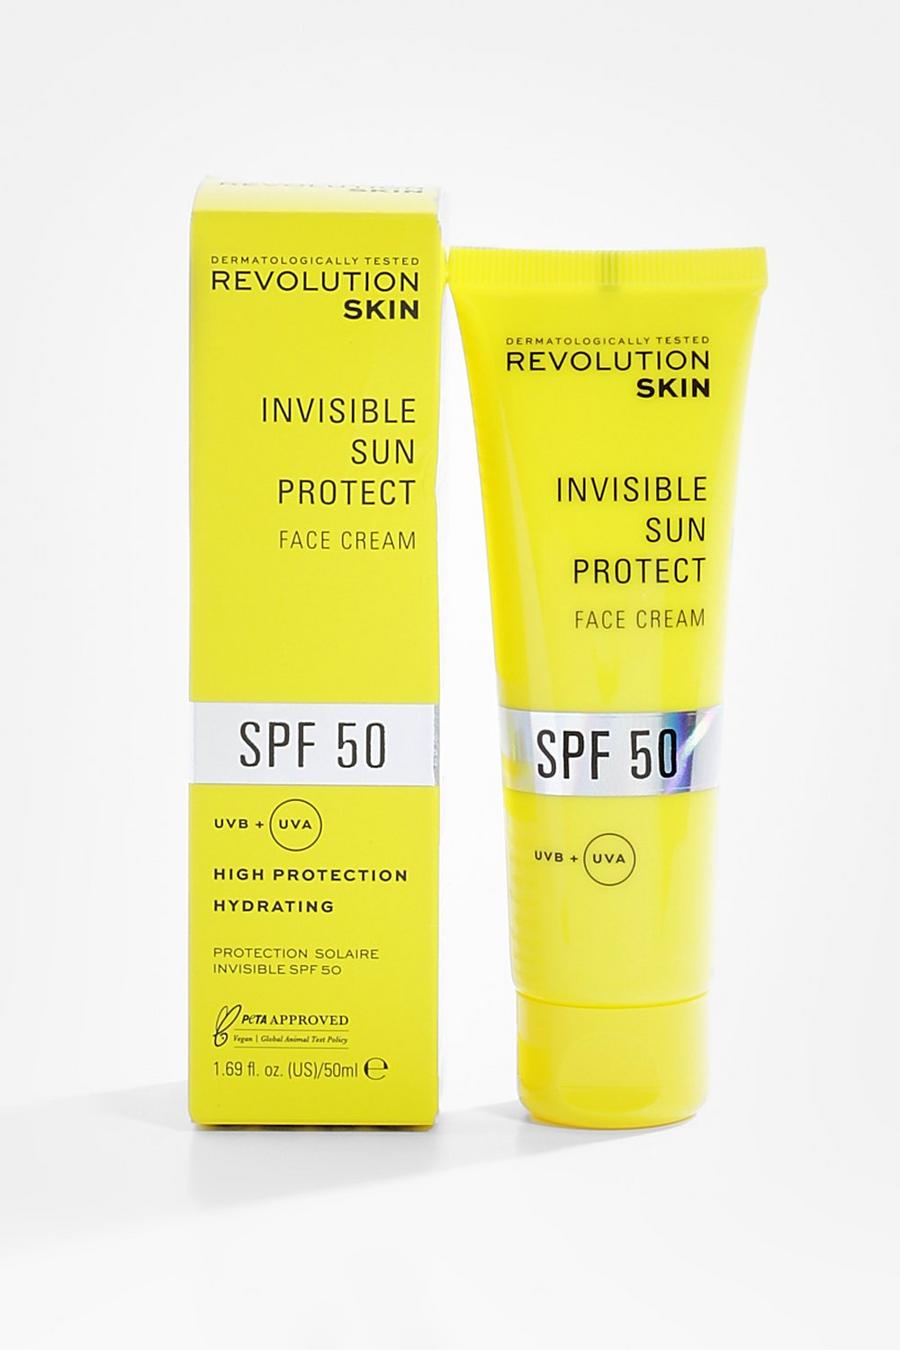 Clear clair Revolution Skincare SPF 50 Invisible Protect Sunscreen